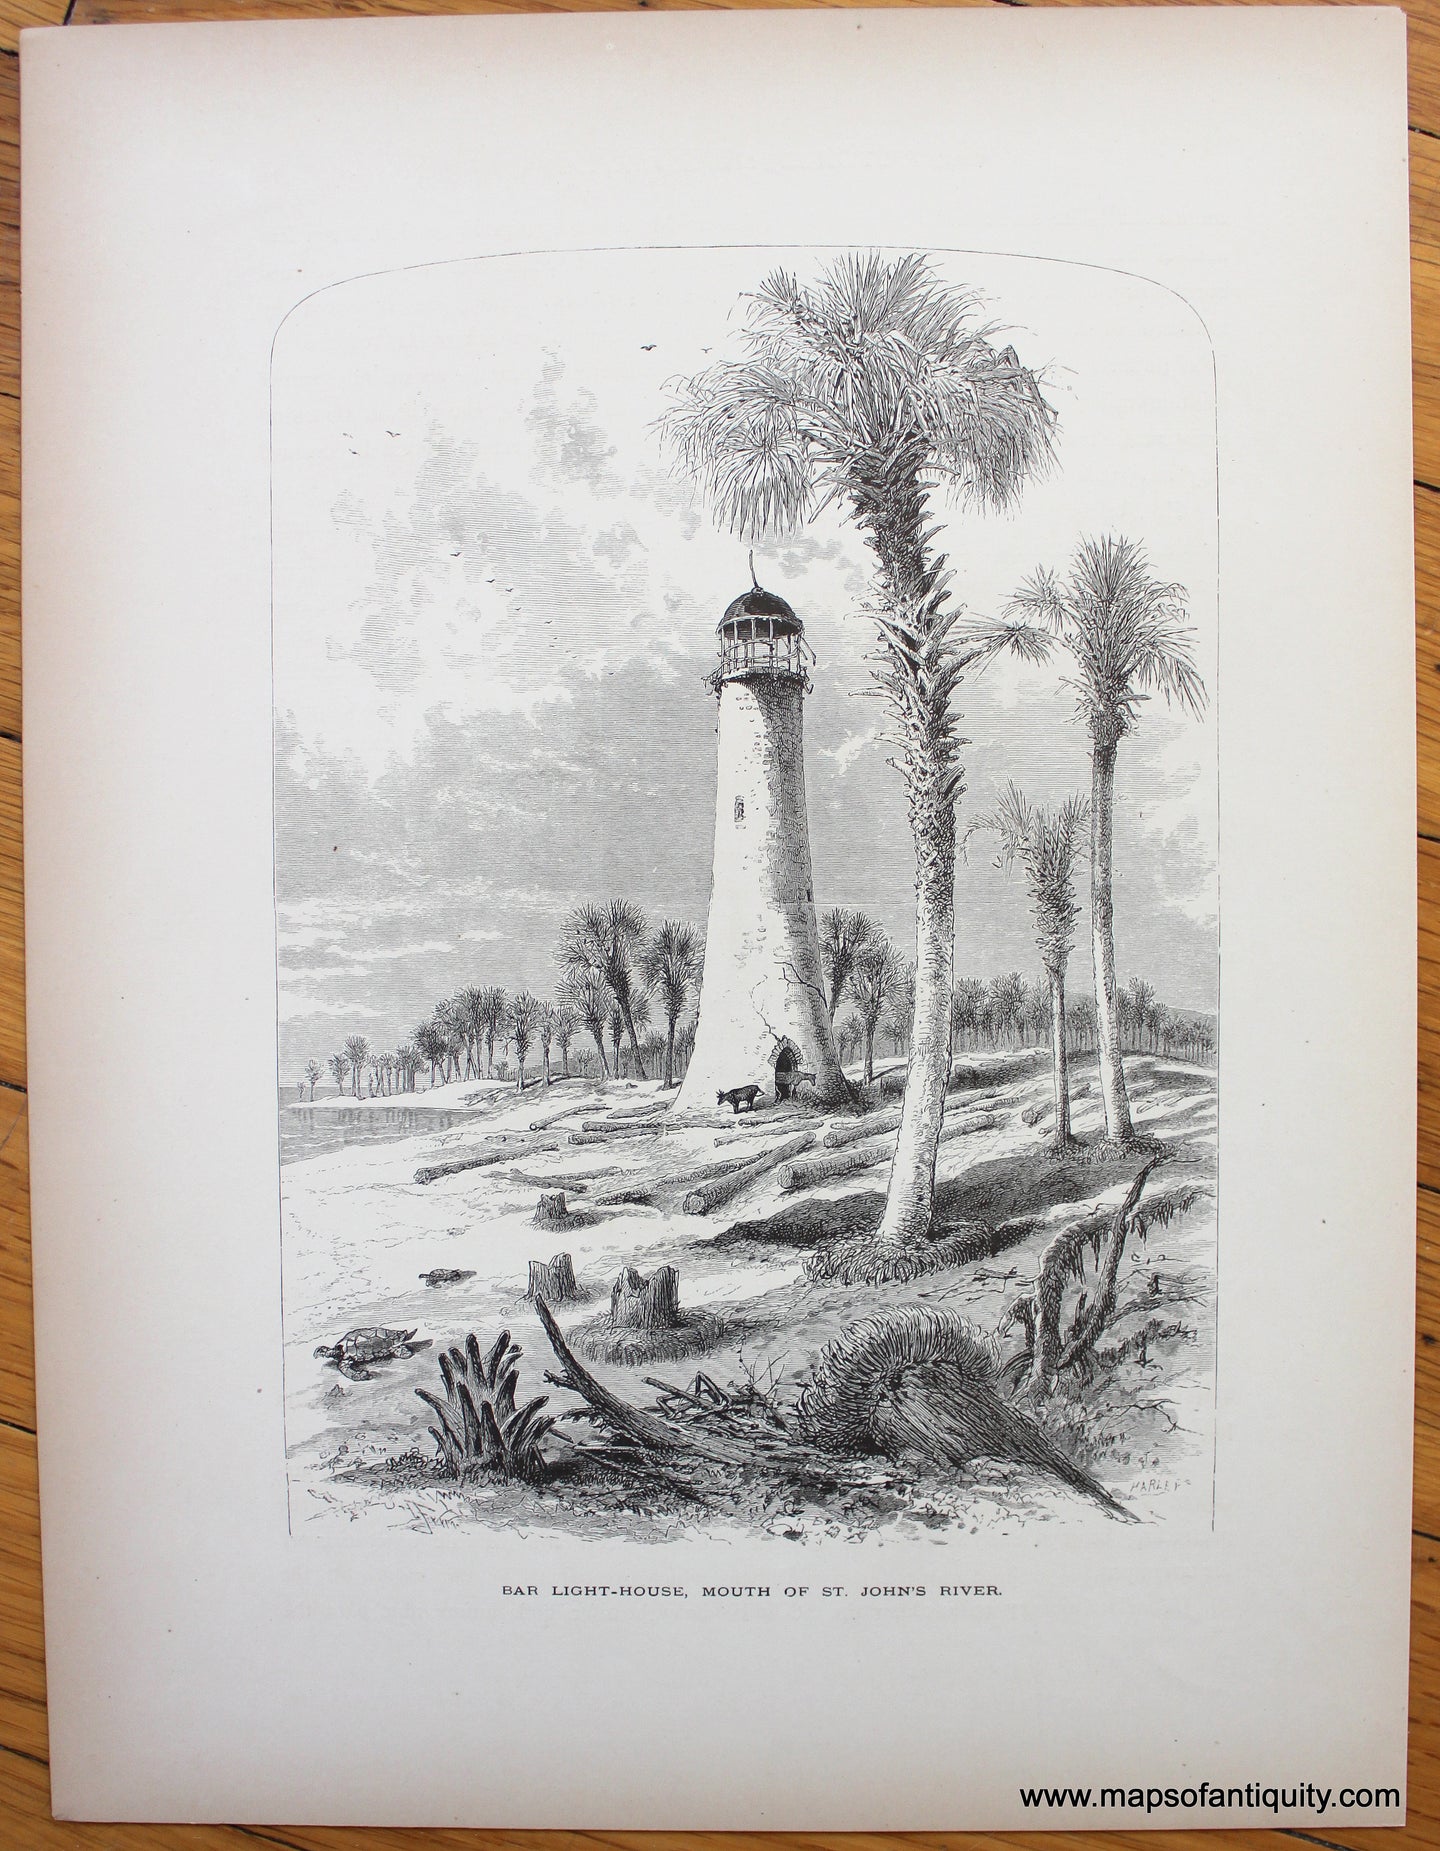 Antique-Print-Prints-Bar-Light-House-Mouth-of-St.-John's-River-Johns-Lighthouse-Old-Florida-1872-Picturesque-America-1800s-19th-century-maps-of-Antiquity